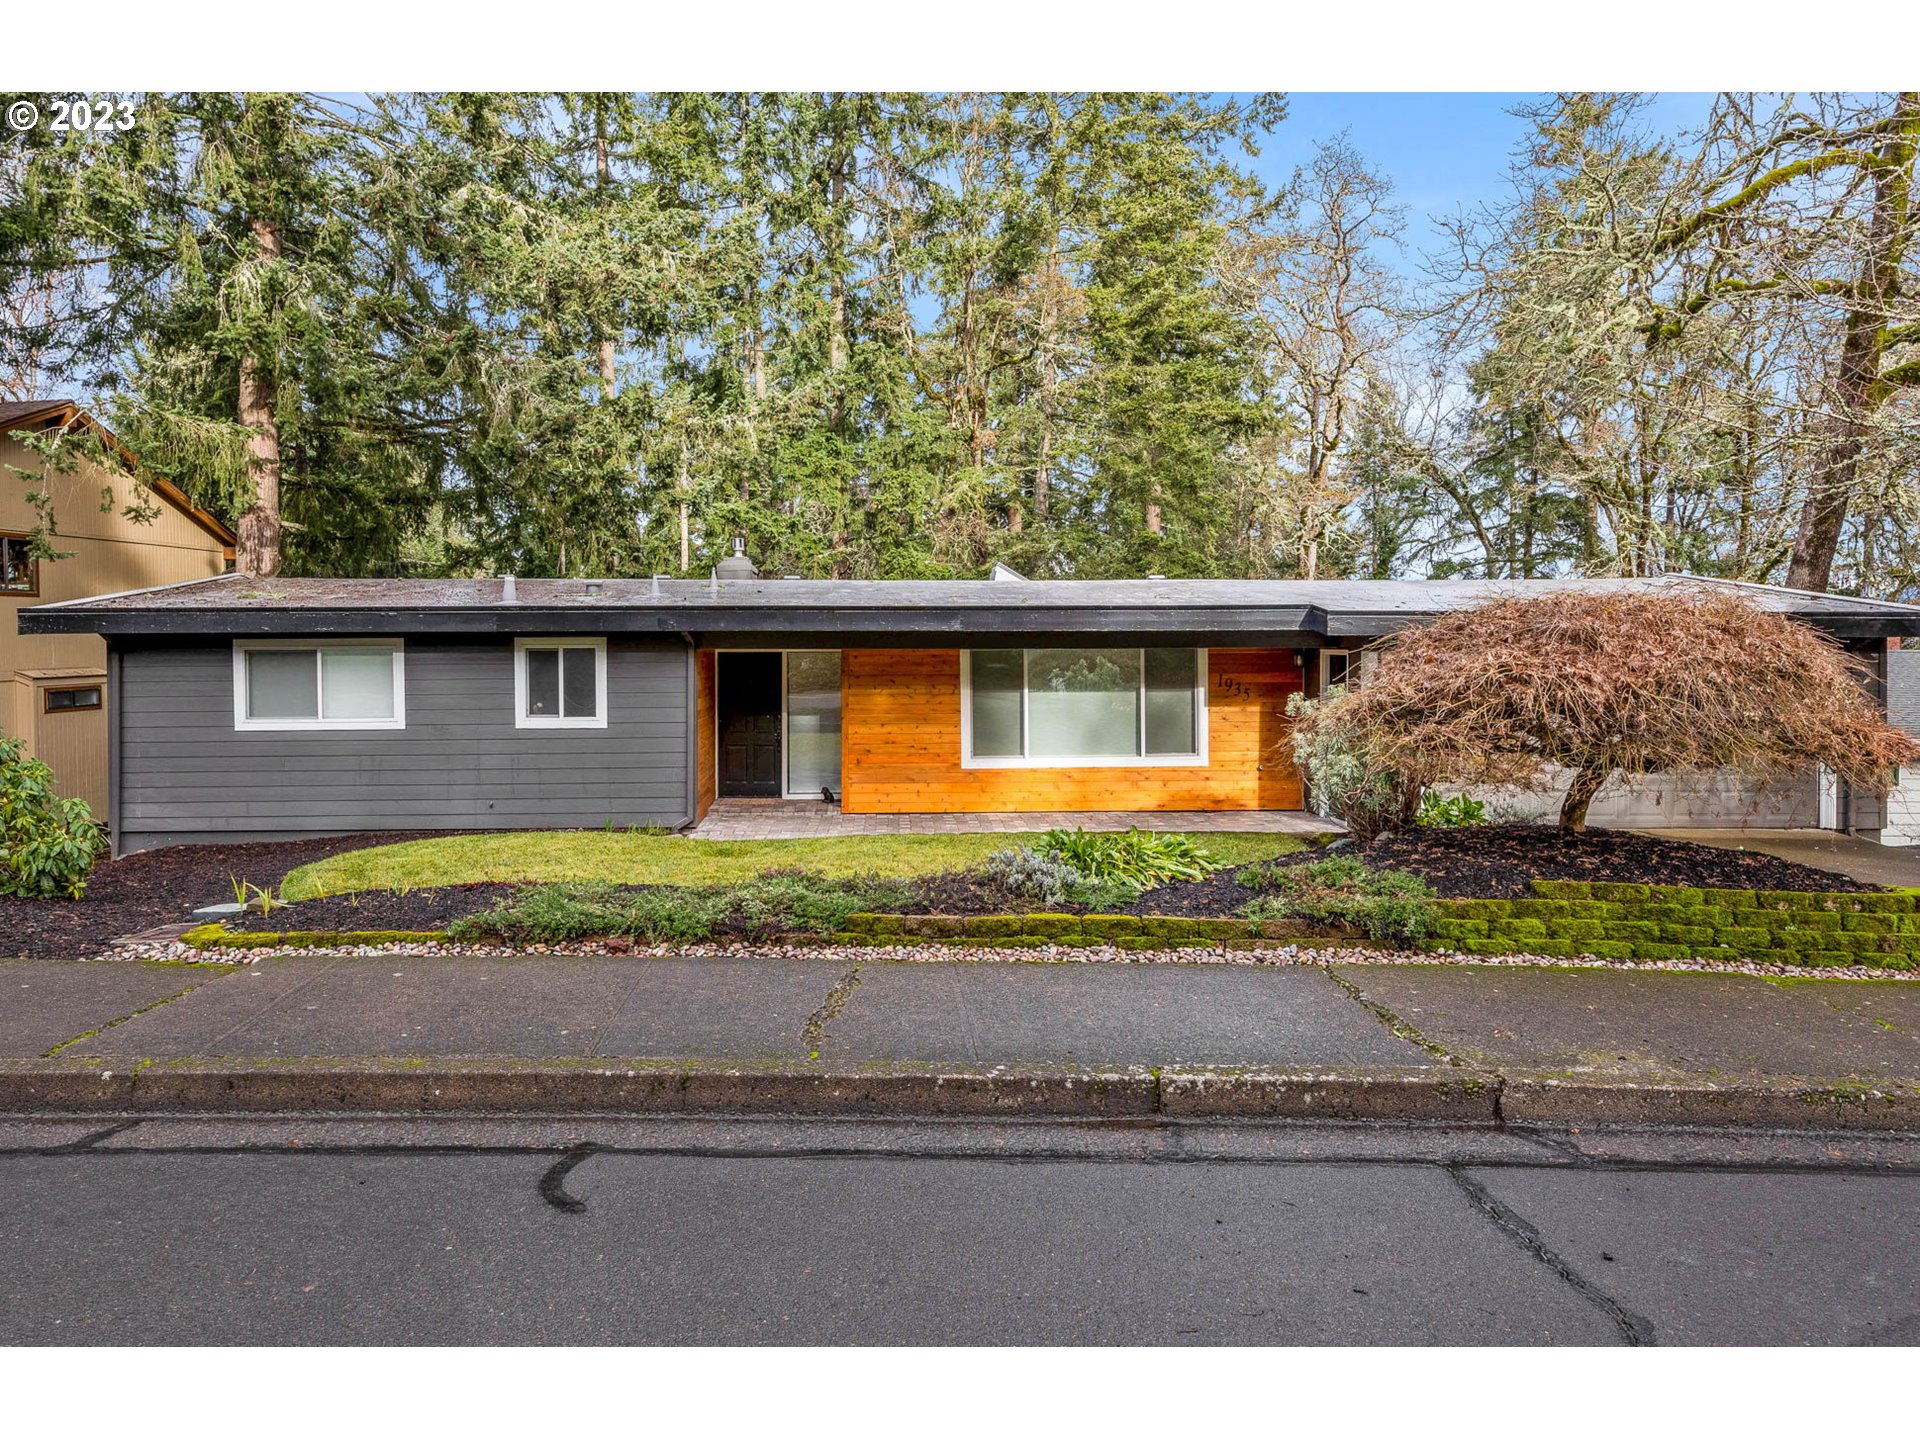 1935 W 28TH AVE, Eugene, OR 97405